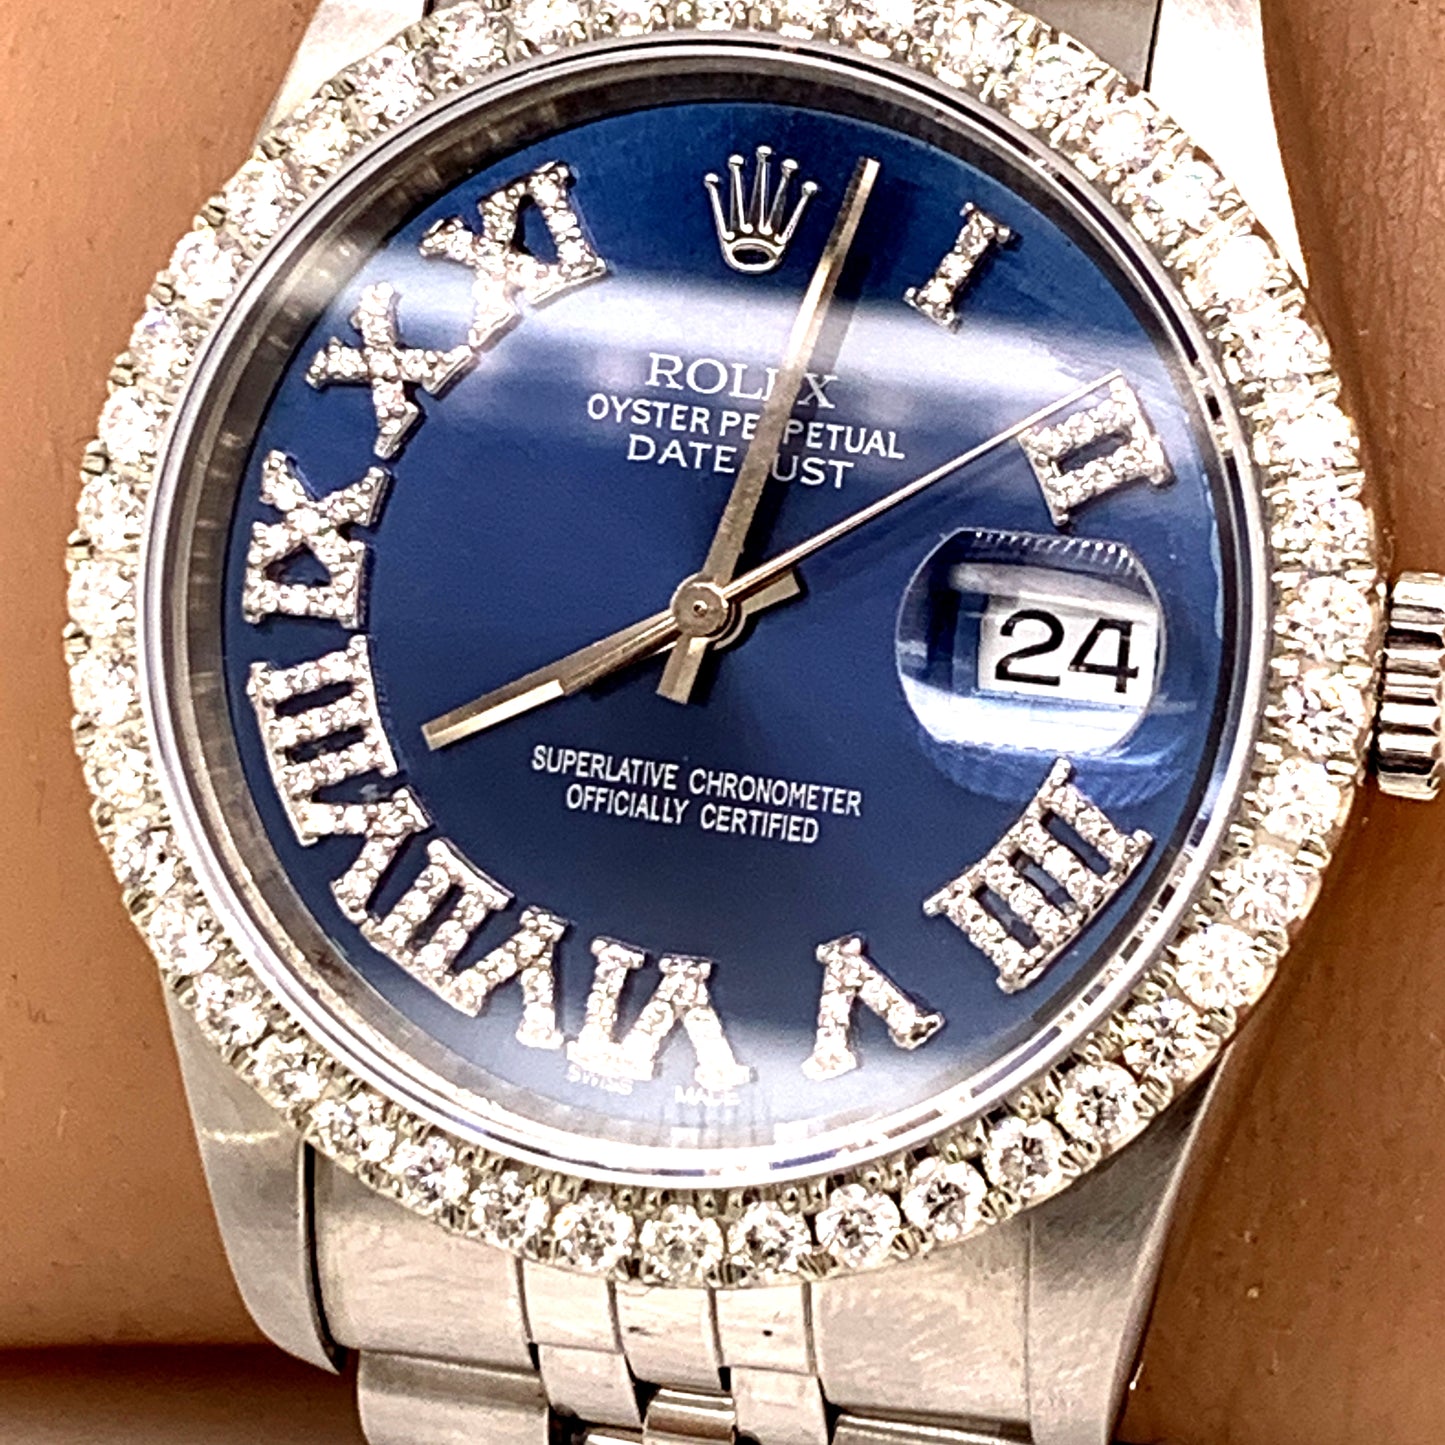 Rolex 16014 Stainless Steel 36mm Blue Roman numeral Diamond dial with diamond bezel